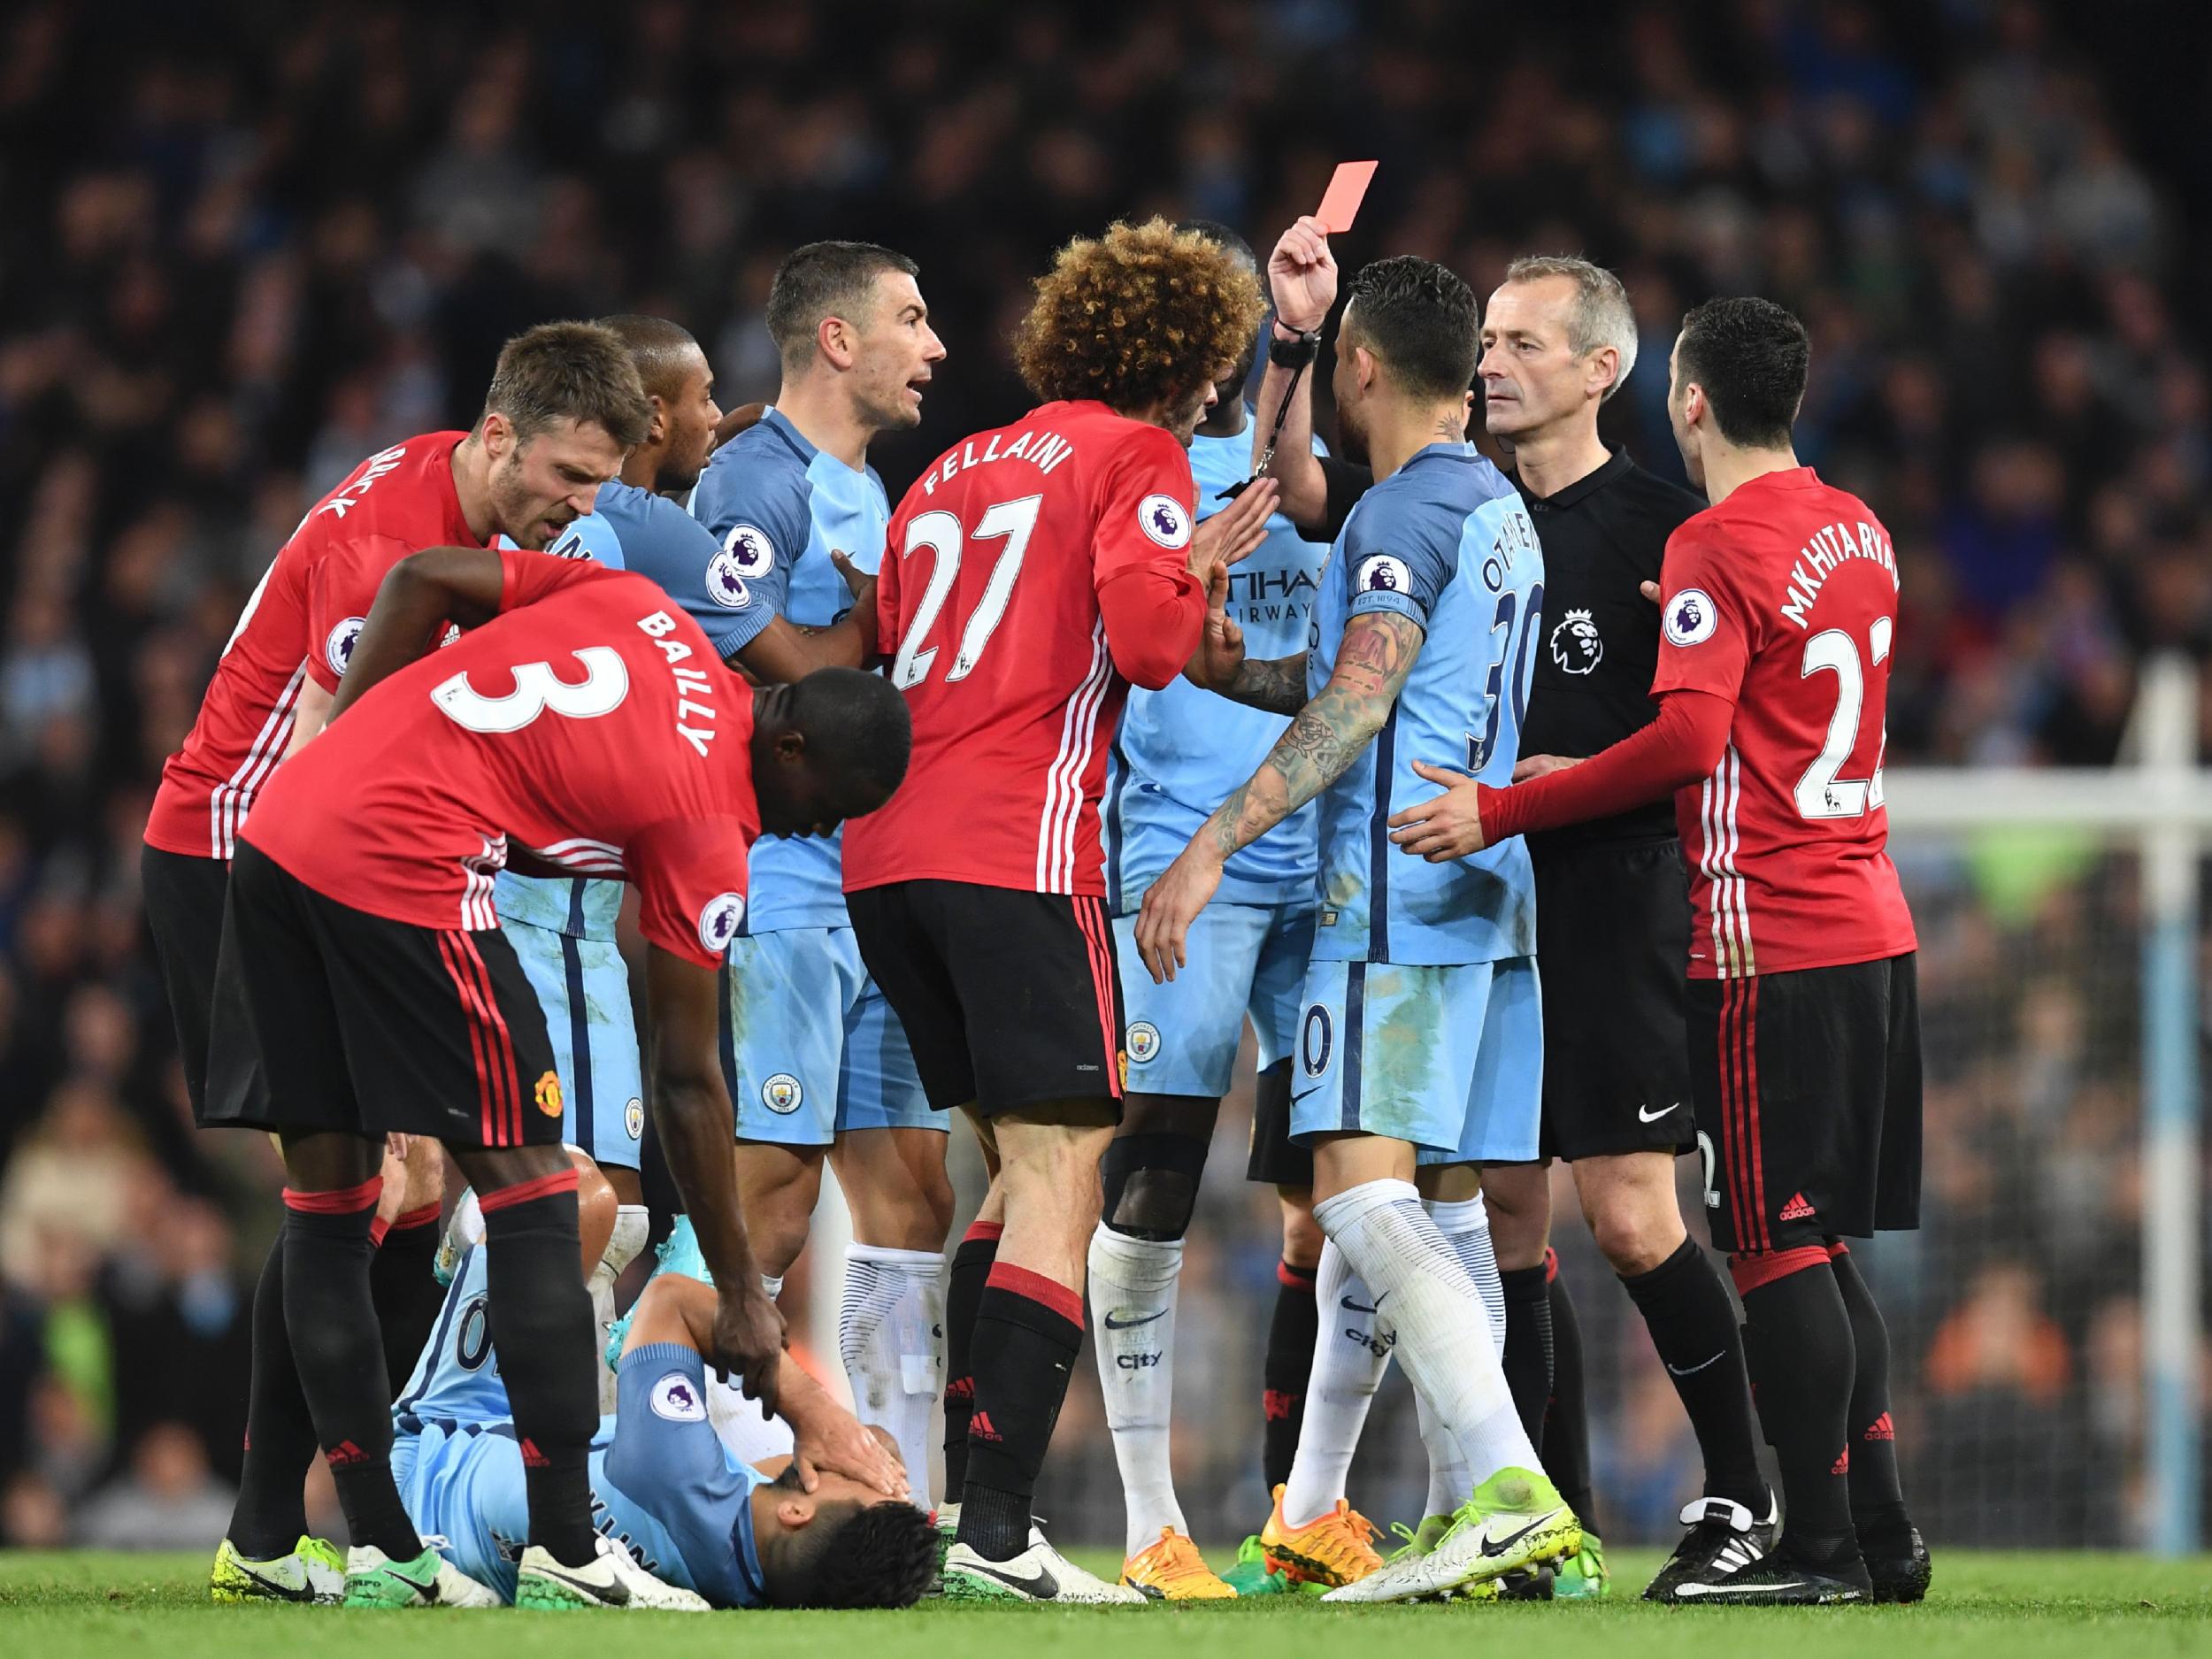 Fellaini was shown a straight red card seconds after picking up a yellow card